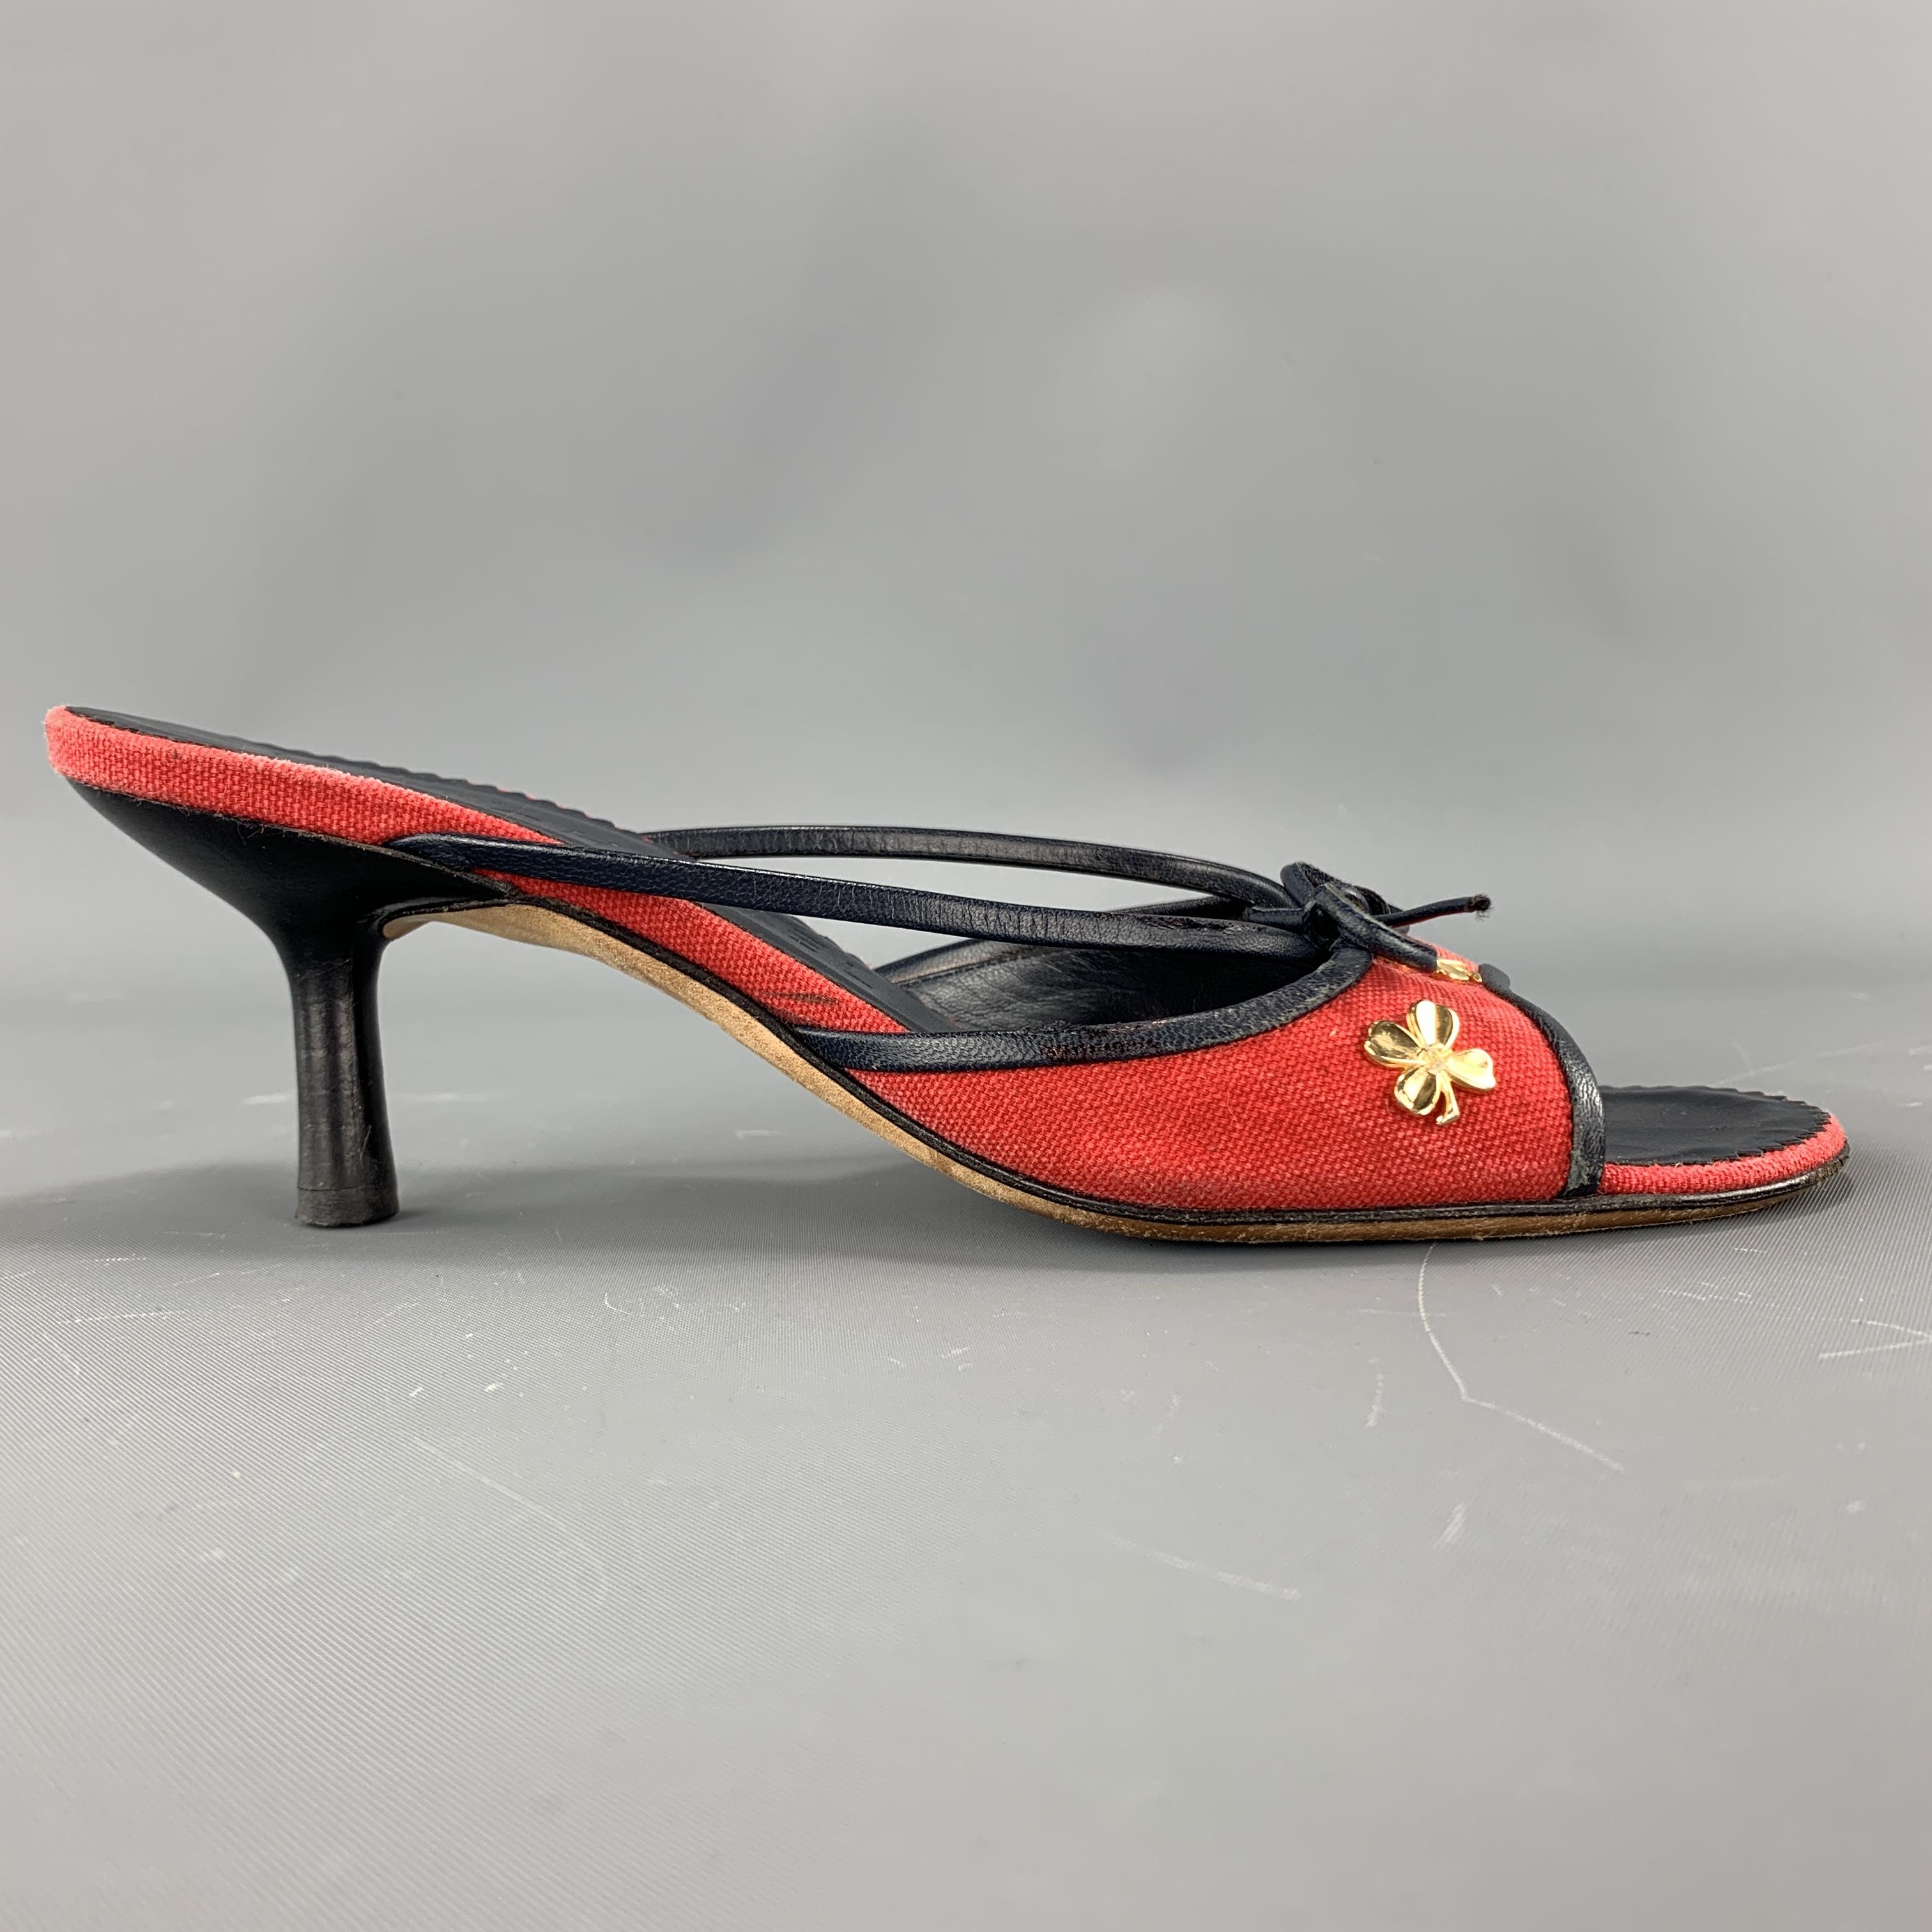 Vintage CHANEL mules come in red canvas with navy leather piping, kitten heel, bow strap, and gold tone CC clover studs. Made in Italy.

Good Pre-Owned Condition.
Marked: IT 36

Heel: 2.75 in.